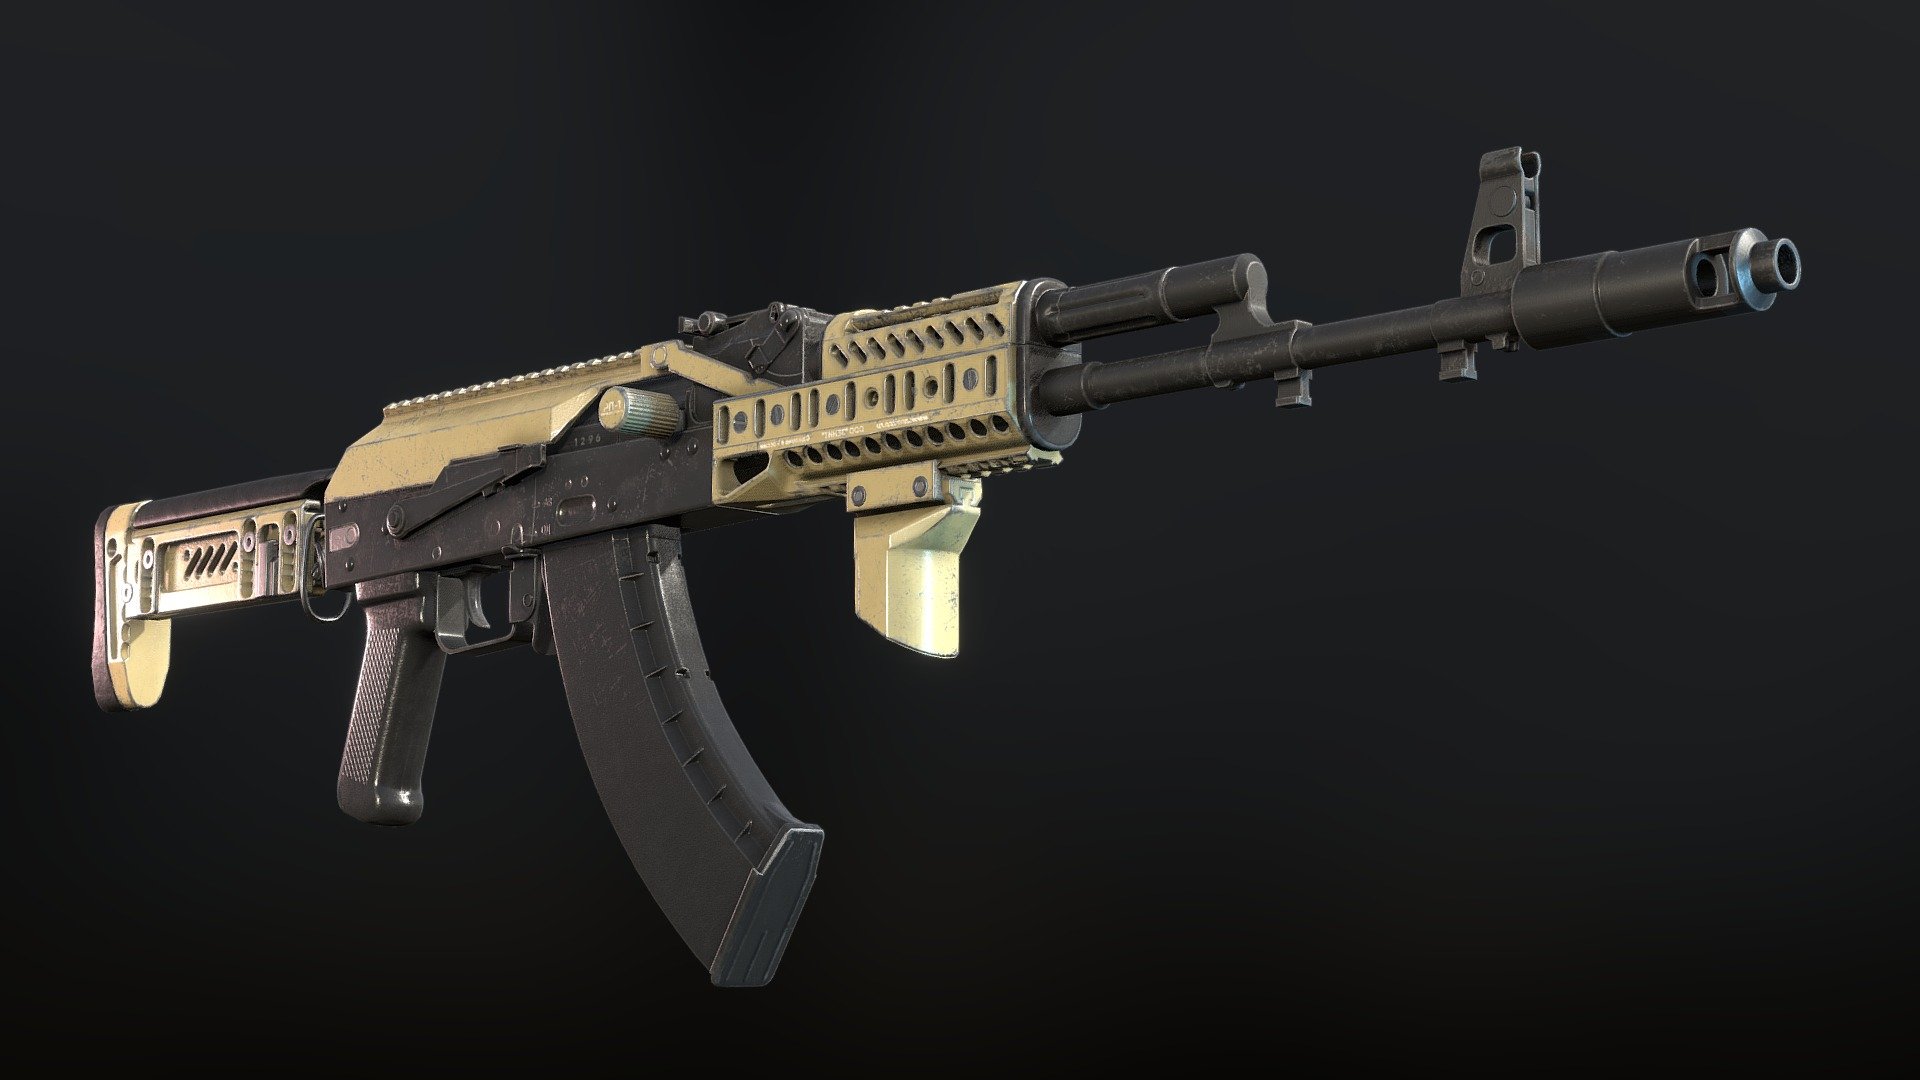 Modeled in Blender 2.93
Textured in Substance Painter

The AK-103 is an assault rifle designed by Russian small arms designer Mikhail Kalashnikov in 1994. It is an AK-100 derivative of the AK-74M that is chambered for the 7.62x39mm M43 cartridge, similar to the AKM. The AK-103 can be fitted with a variety of sights, including night vision and telescopic sights, plus a knife-bayonet or a grenade launcher like the GP-34. Newer versions can fit Picatinny rails, allowing more accessories to be mounted. It uses plastic components where possible instead of wood or metal, with such components being the pistol grip, handguards, folding stock and depending on the type, the magazine 3d model